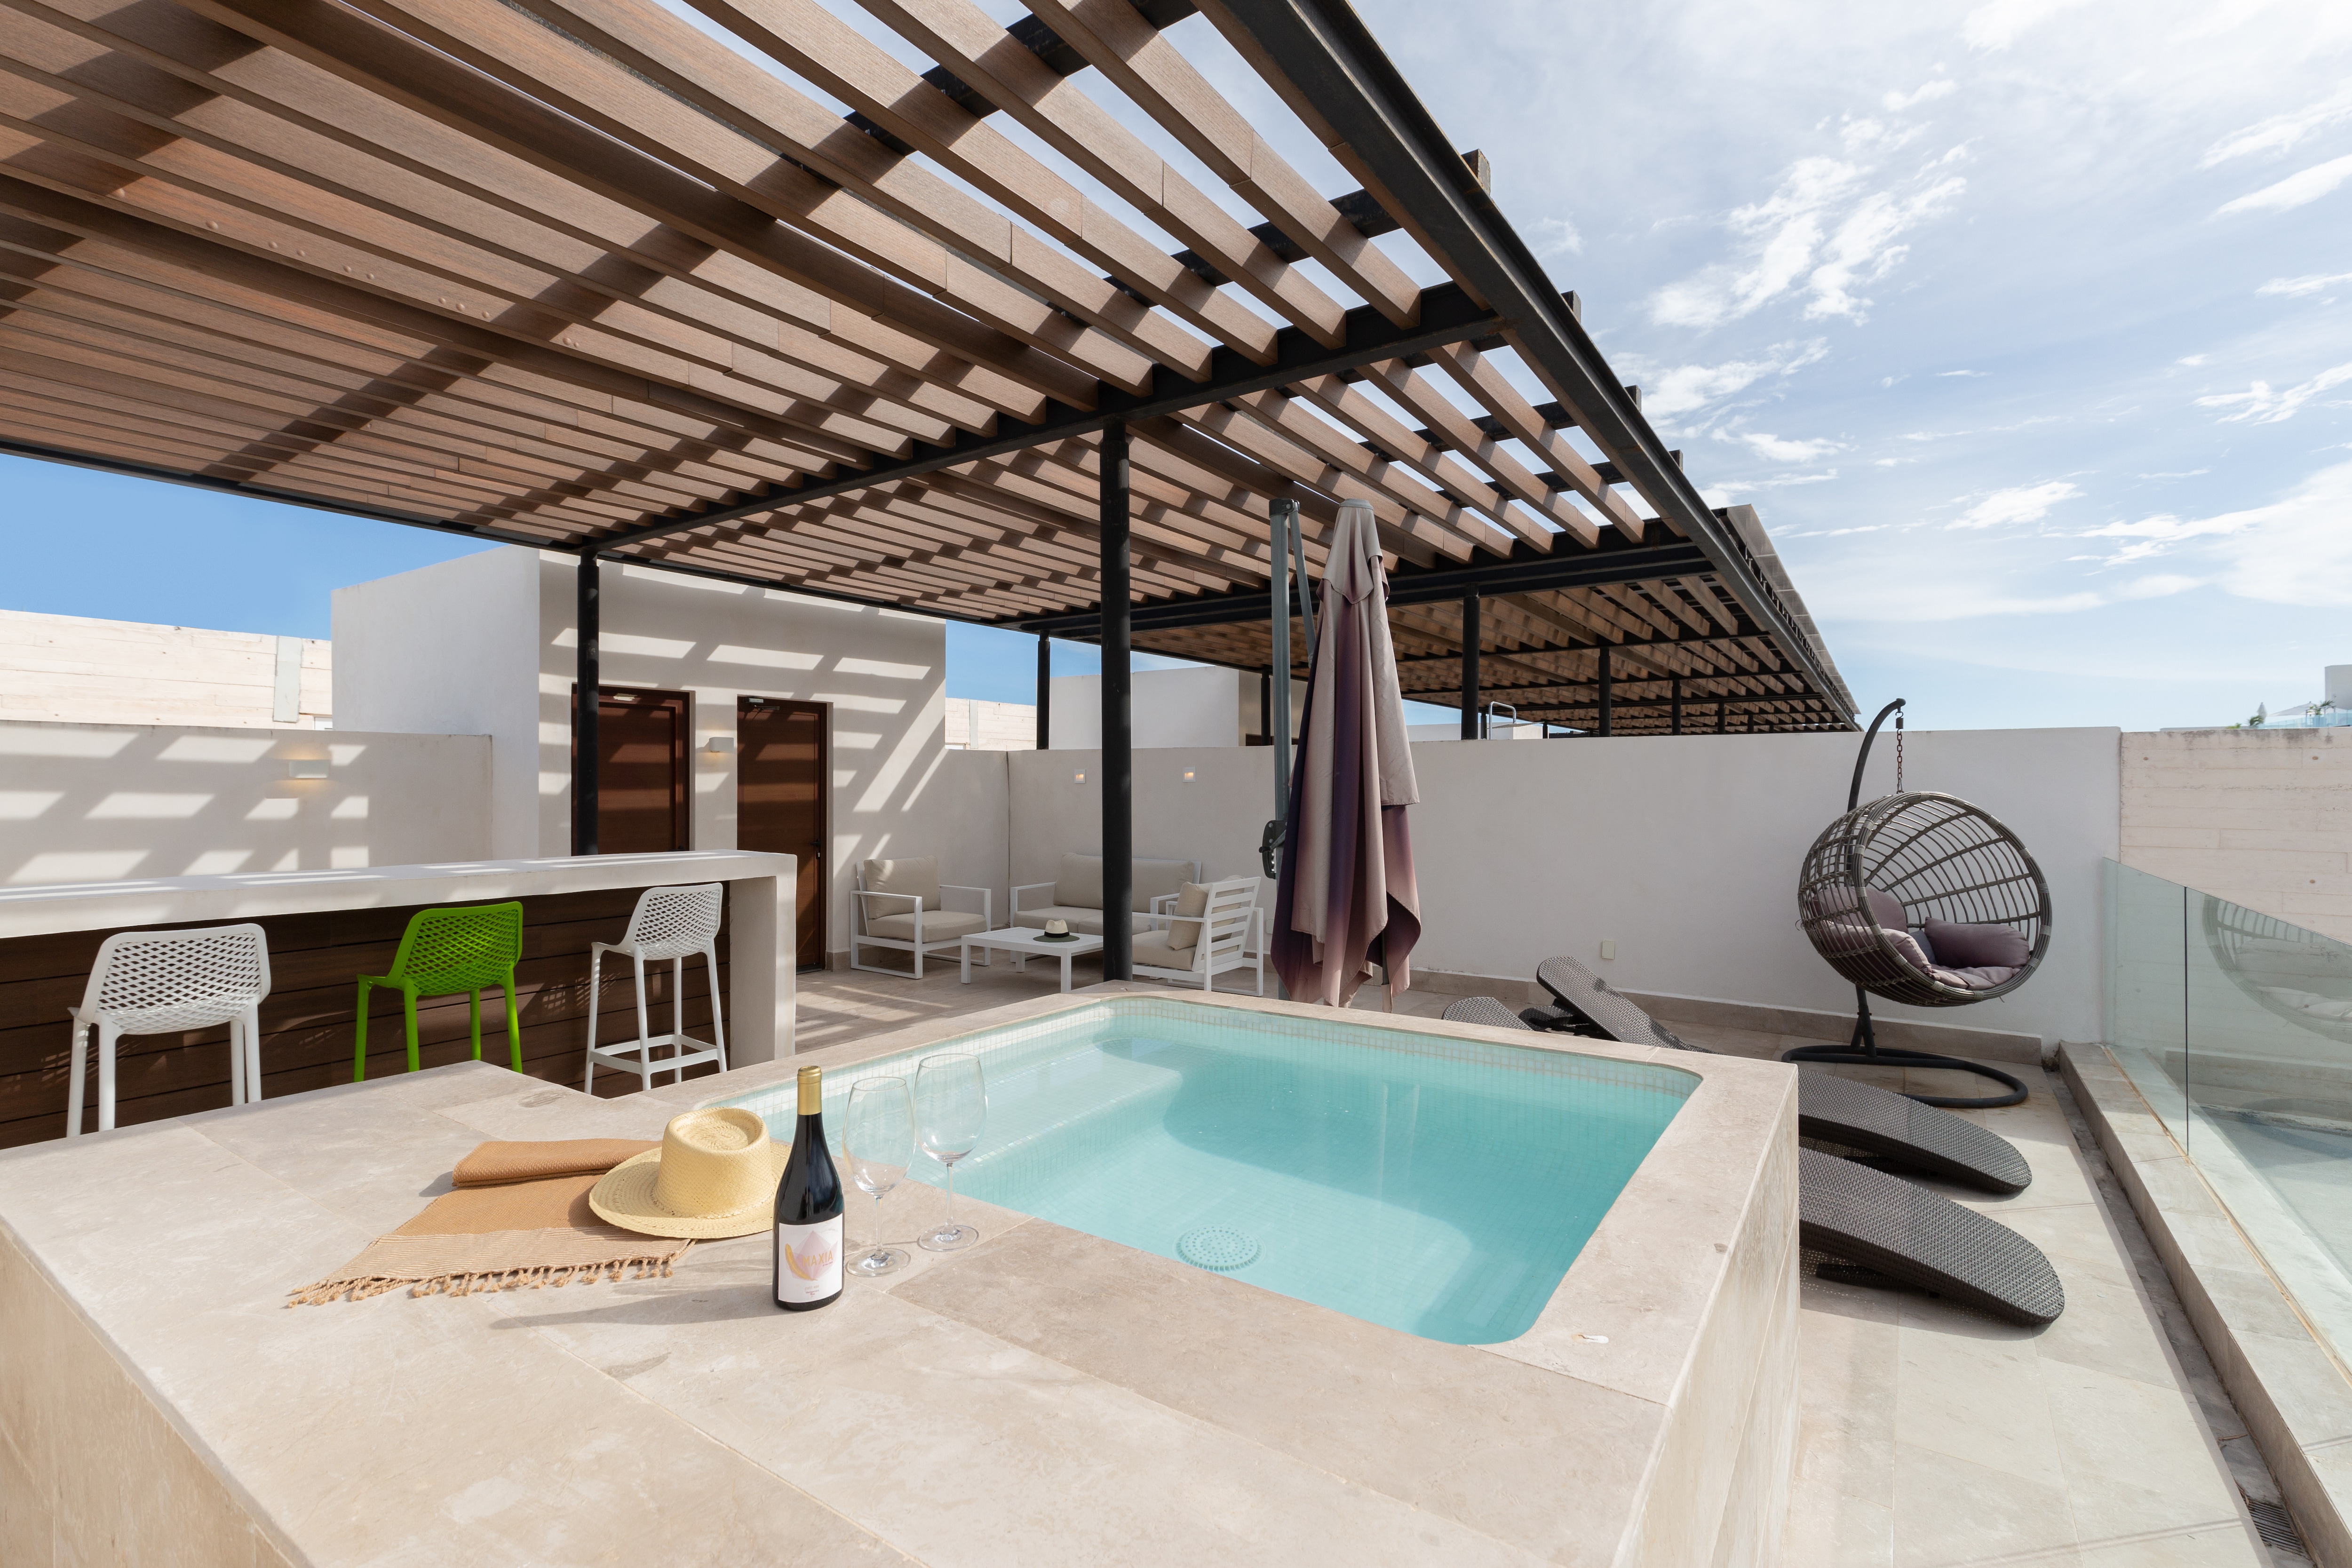 Rooftop private pool perfect for hangouts and good laughs with company.